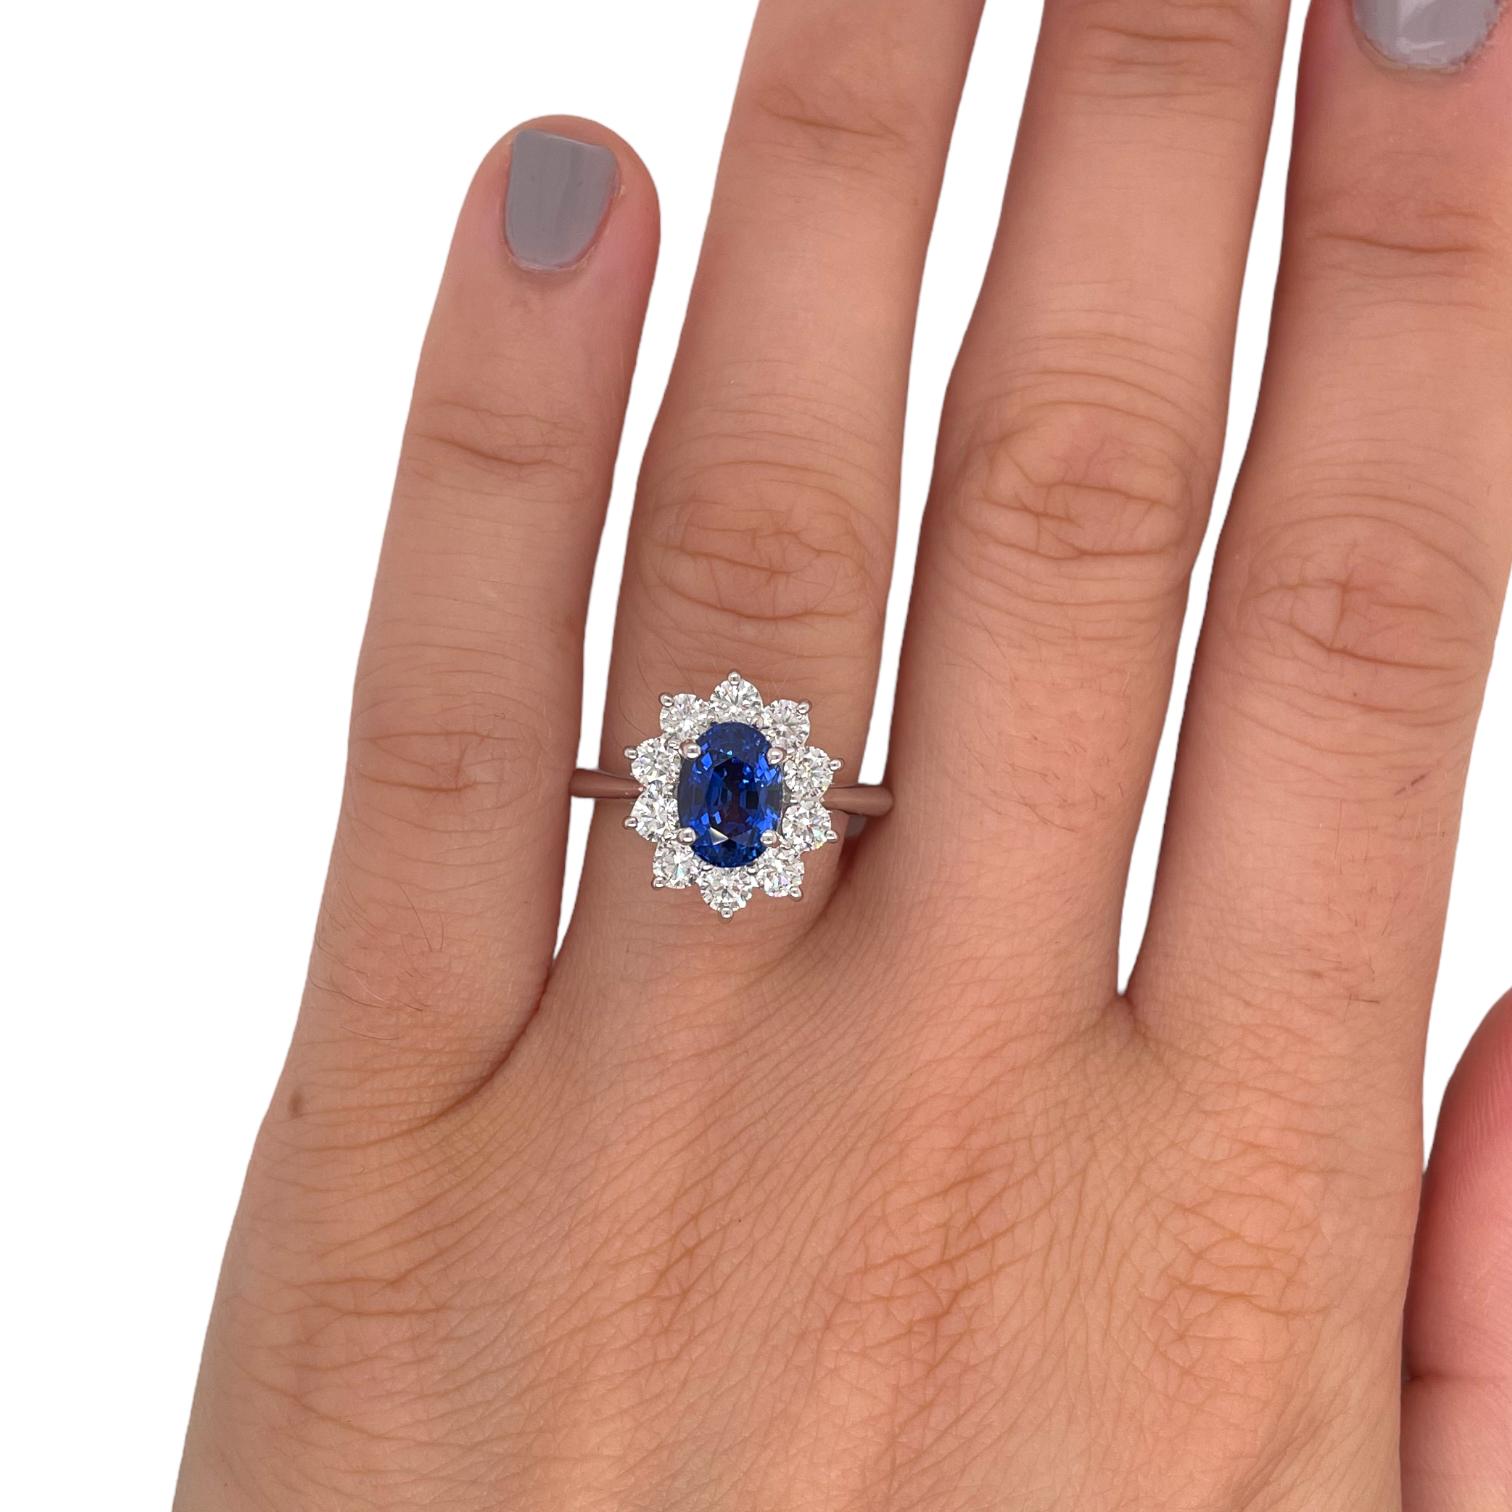 Ring contains one center certified oval shape sapphire weighing 1.94ct. Center stone is surrounded by 10 round brilliant diamonds, 1.00tcw. Sapphire and diamonds are mounted in handmade prong settings. Diamonds are F in color and VS2 in clarity.